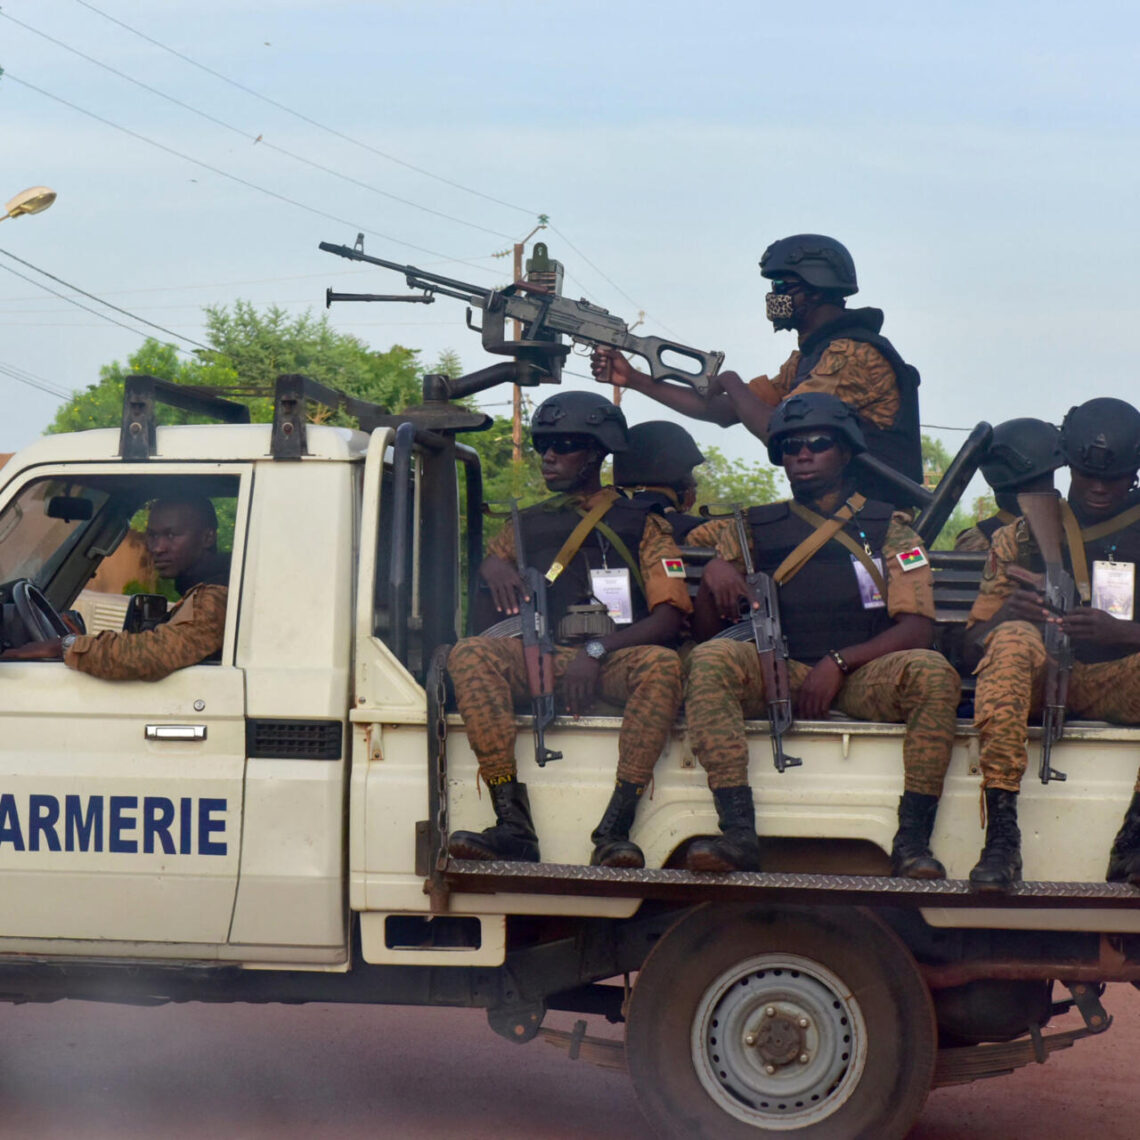 A picture take on October 30, 2018 shows Burkinabe gendarmes sitting on their vehicle in the city of Ouhigouya in the north of the country. - Two Burkinabe soldiers were killed and three wounded in the night of November 5, 2018 in Nassoumbou, northern Burkina Faso, near the Malian border, by the explosion of an improvised explosive device, according to security sources. (Photo by ISSOUF SANOGO / AFP)